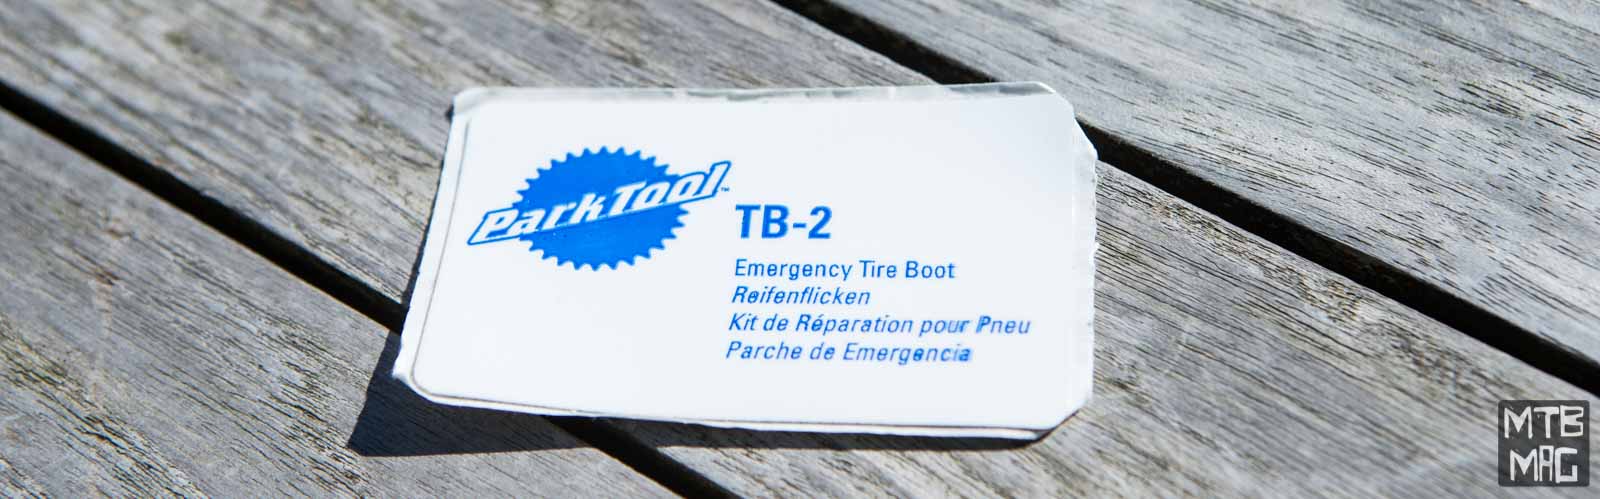 TB-2 Emergency Tire Boots